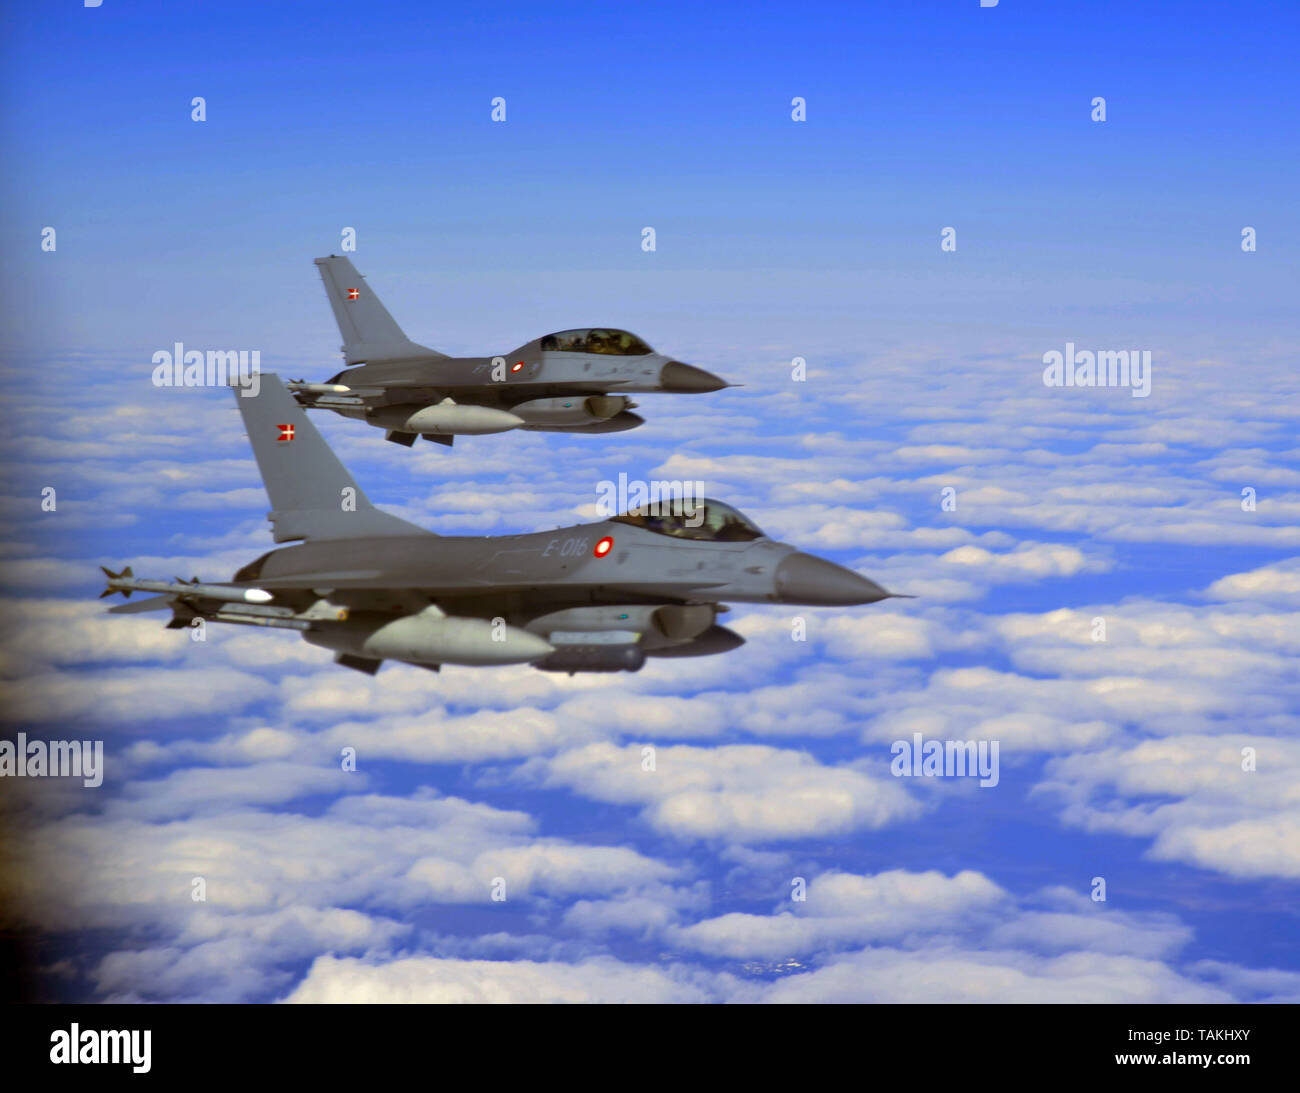 Royal Norwegian Air Force F-16C fighter aircraft fly in formation during NATO exercise Arctic Challenge May 24, 2019 over Finland. Stock Photo